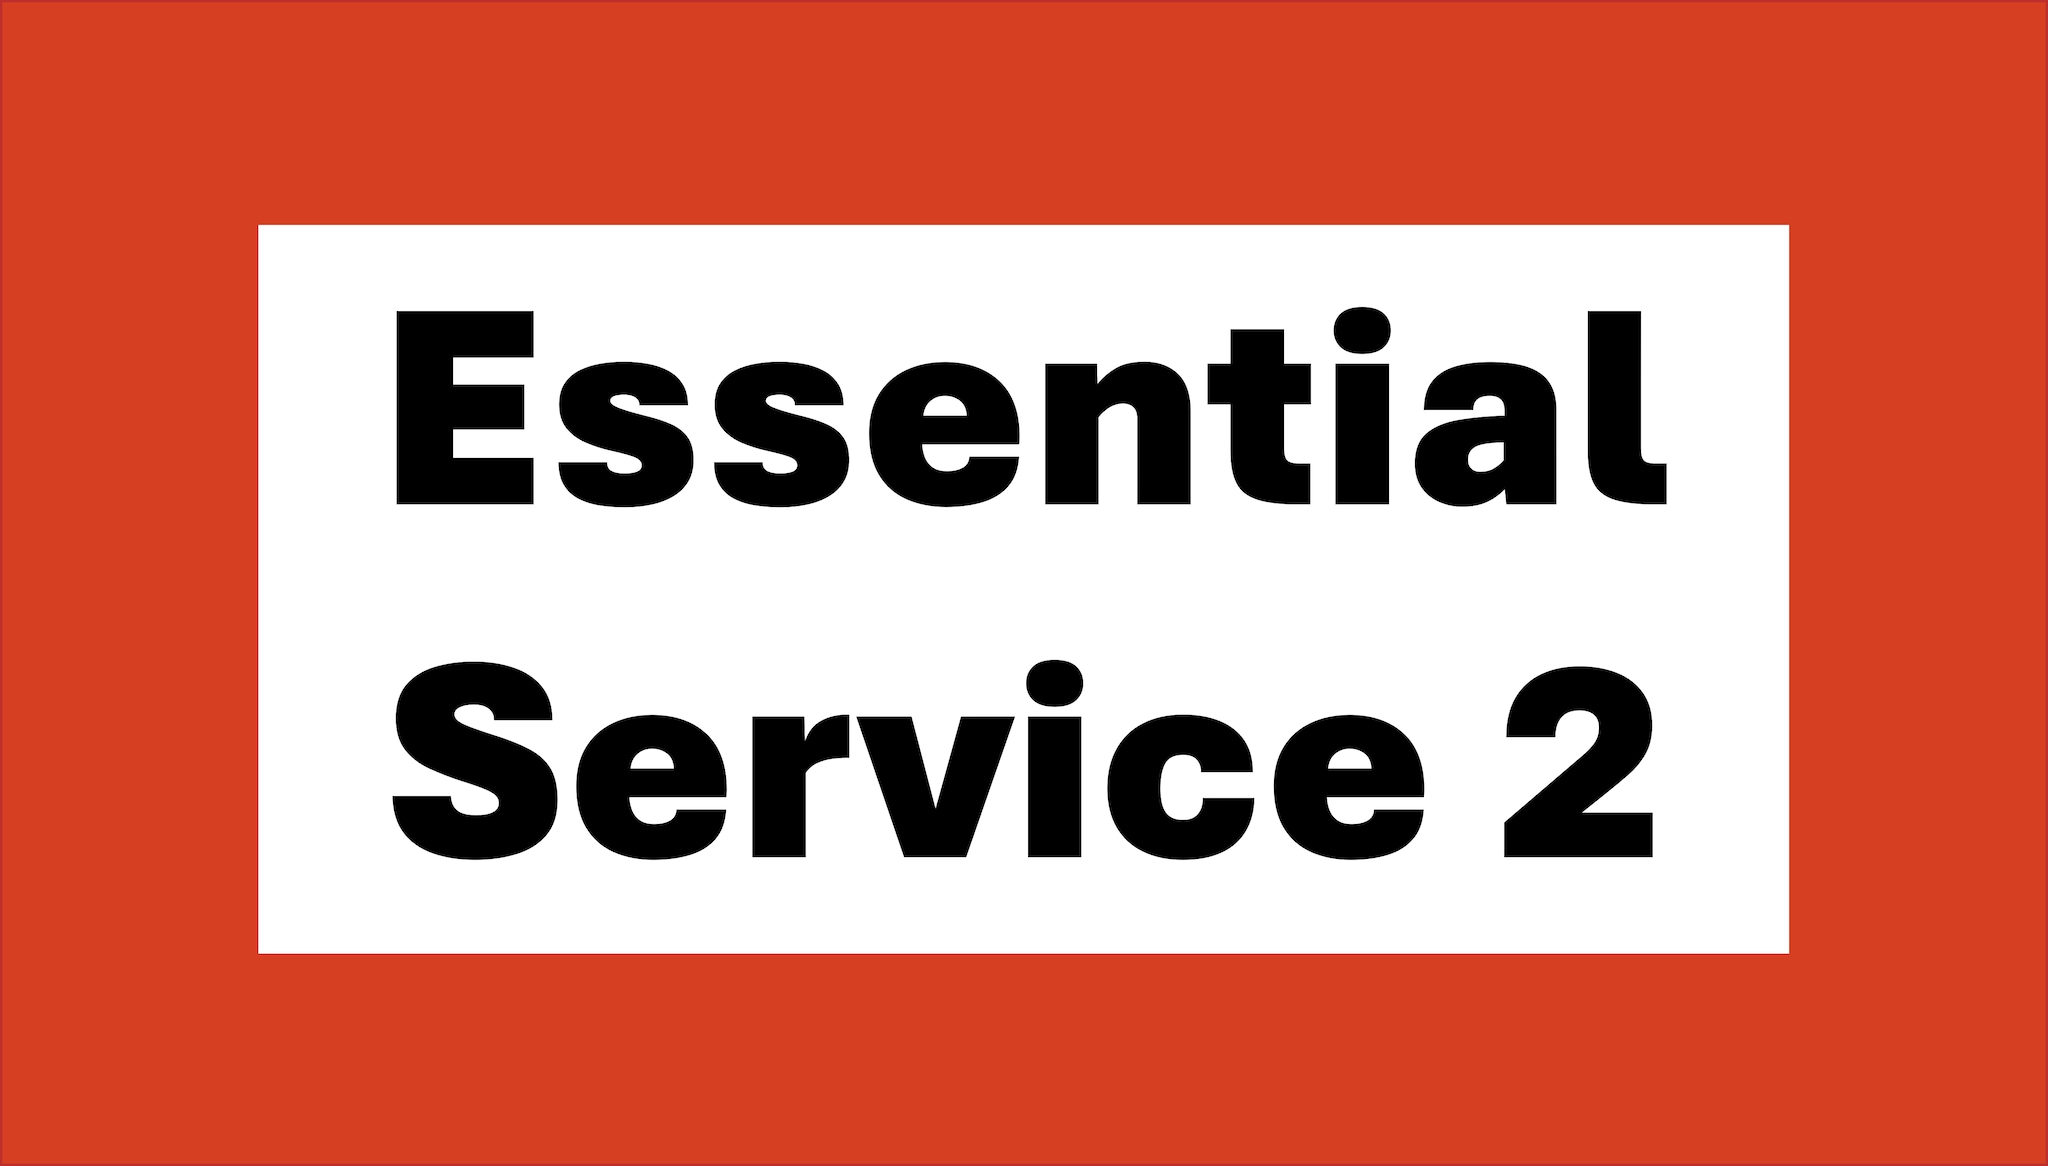 Red-orange graphic with black text in white box reading Essential Service 2